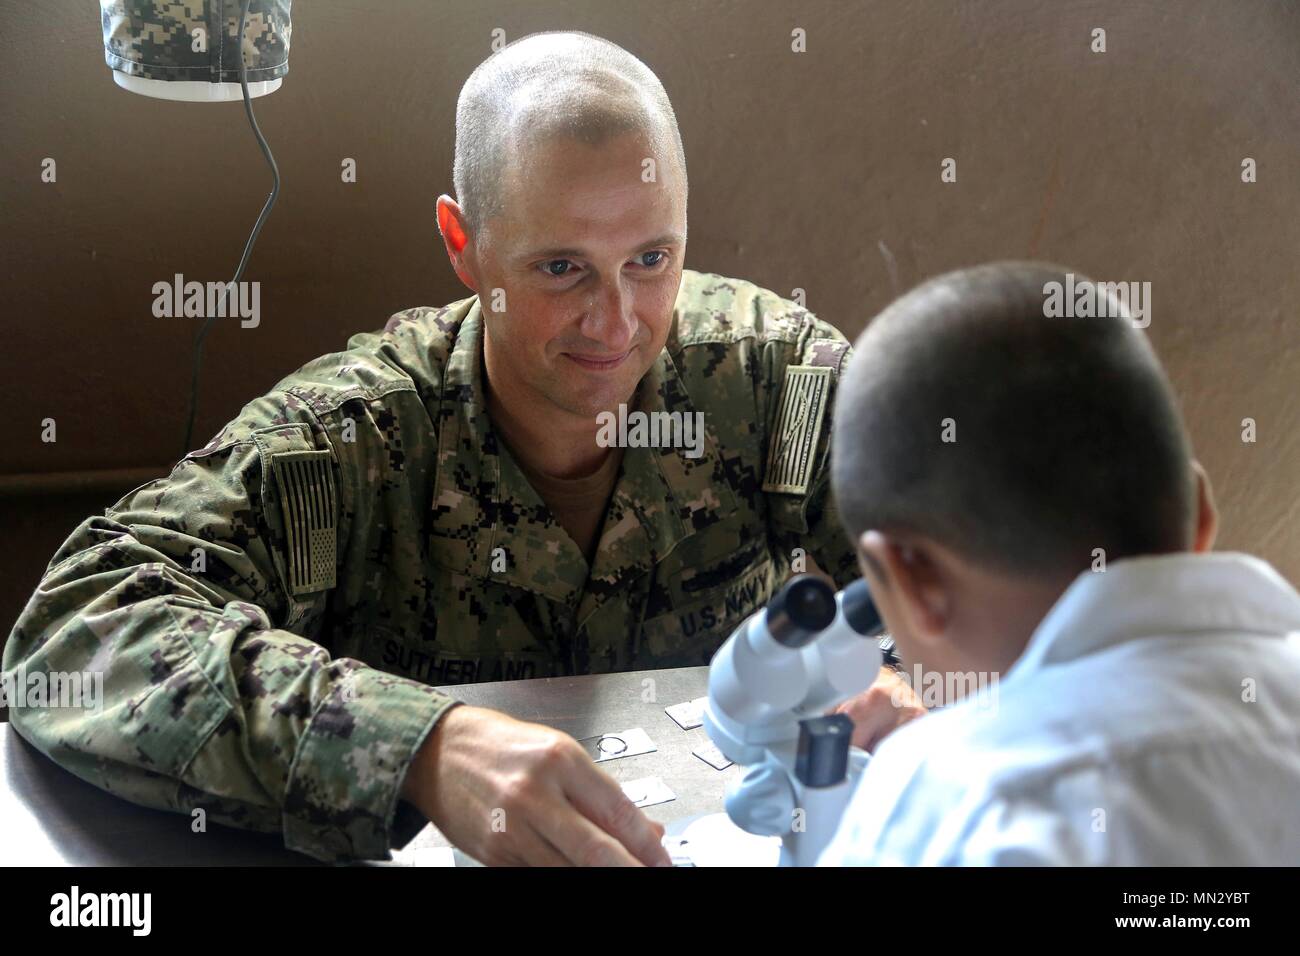 170823-A-QE286-0060 AGUAN, Honduras (August 23, 2017) U.S. Navy Lt. Cmdr. Ian Sutherland, technical director for the Navy Entomology Center of Excellence, helps a boy examine an insect through a microscope at Escuela Lidia Handal, during a Southern Partnership Station 17 community relations project (COMREL). SPS 17 is a U.S. Navy deployment executed by U.S. Naval Forces Southern Command/U.S. 4th Fleet, focused on subject matter expert exchanges with partner nation militaries and security forces in Central and South America. (U.S. Army photo by SPC Judge Jones/Released) Stock Photo